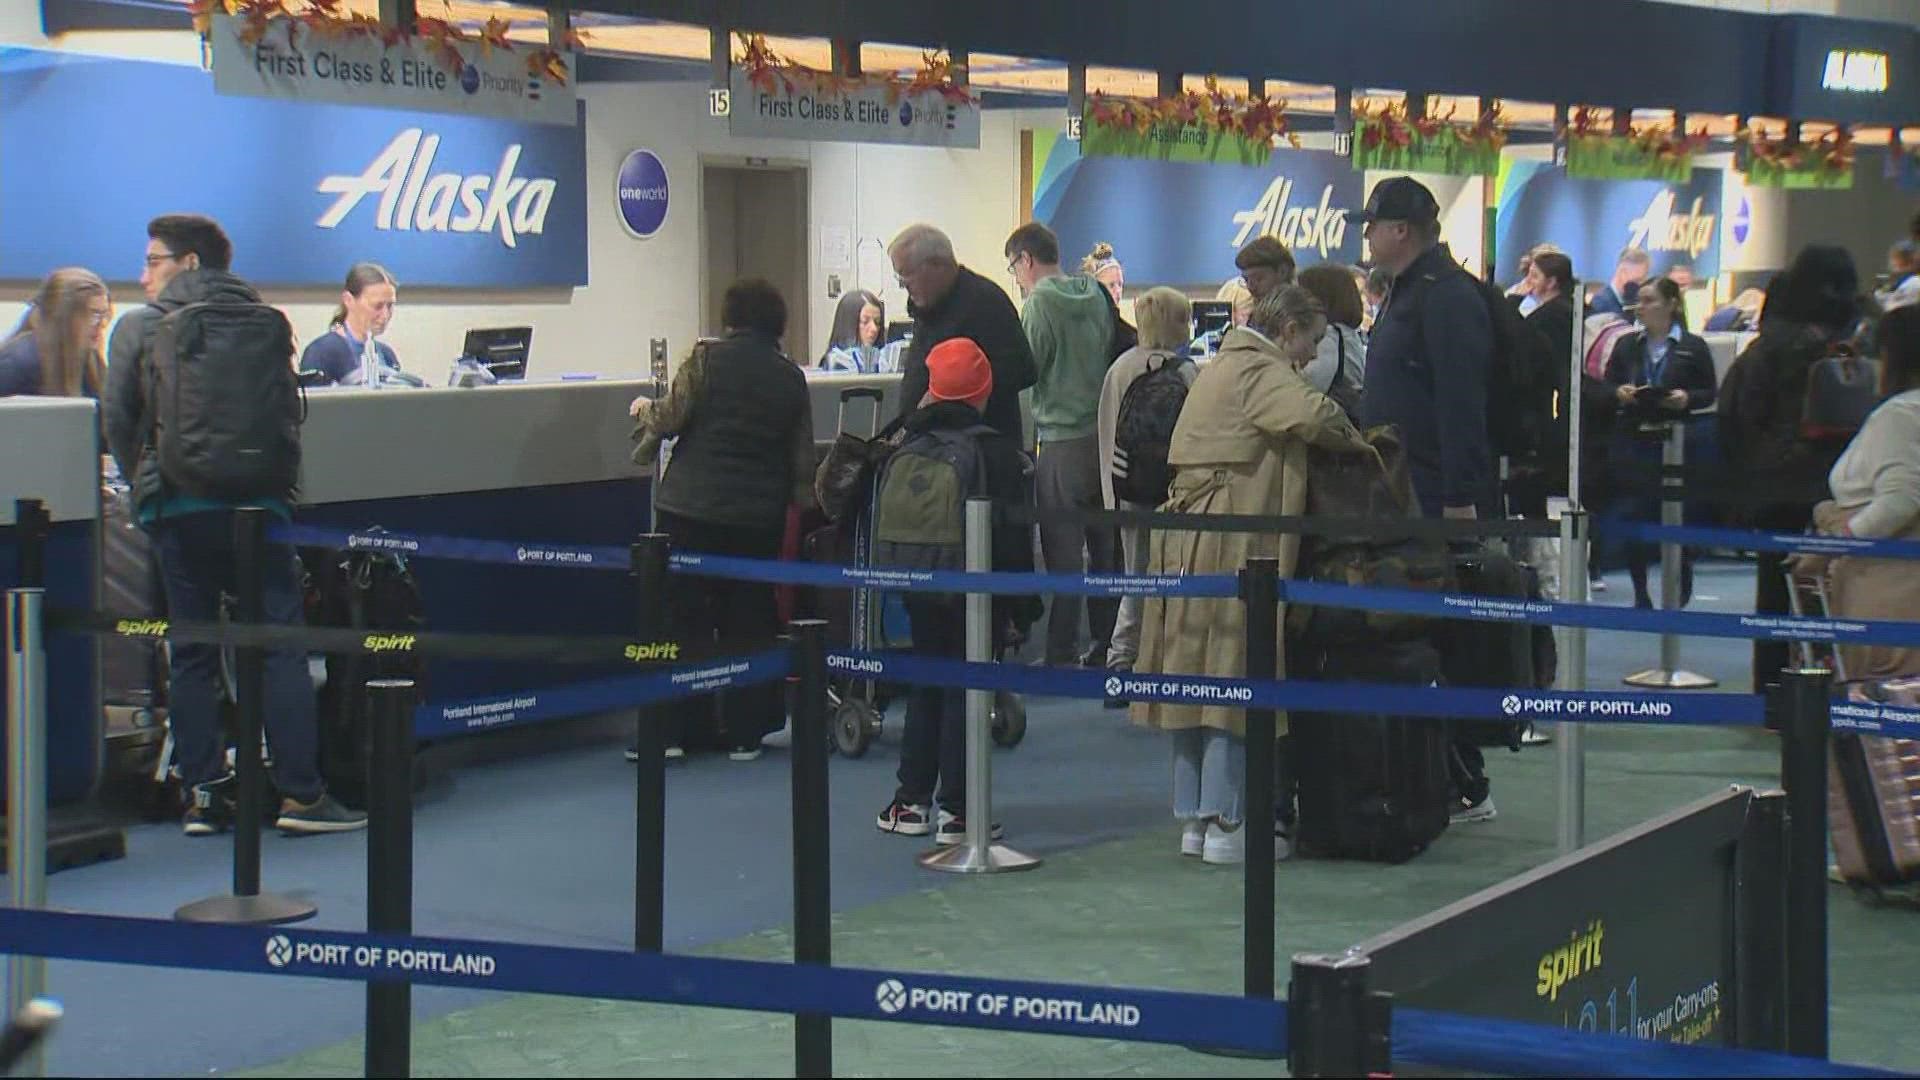 The day before Thanksgiving is one of the busiest days of the year at the Portland International Airport. PDX expects 49,000 people to pass through on Nov. 23 alone.